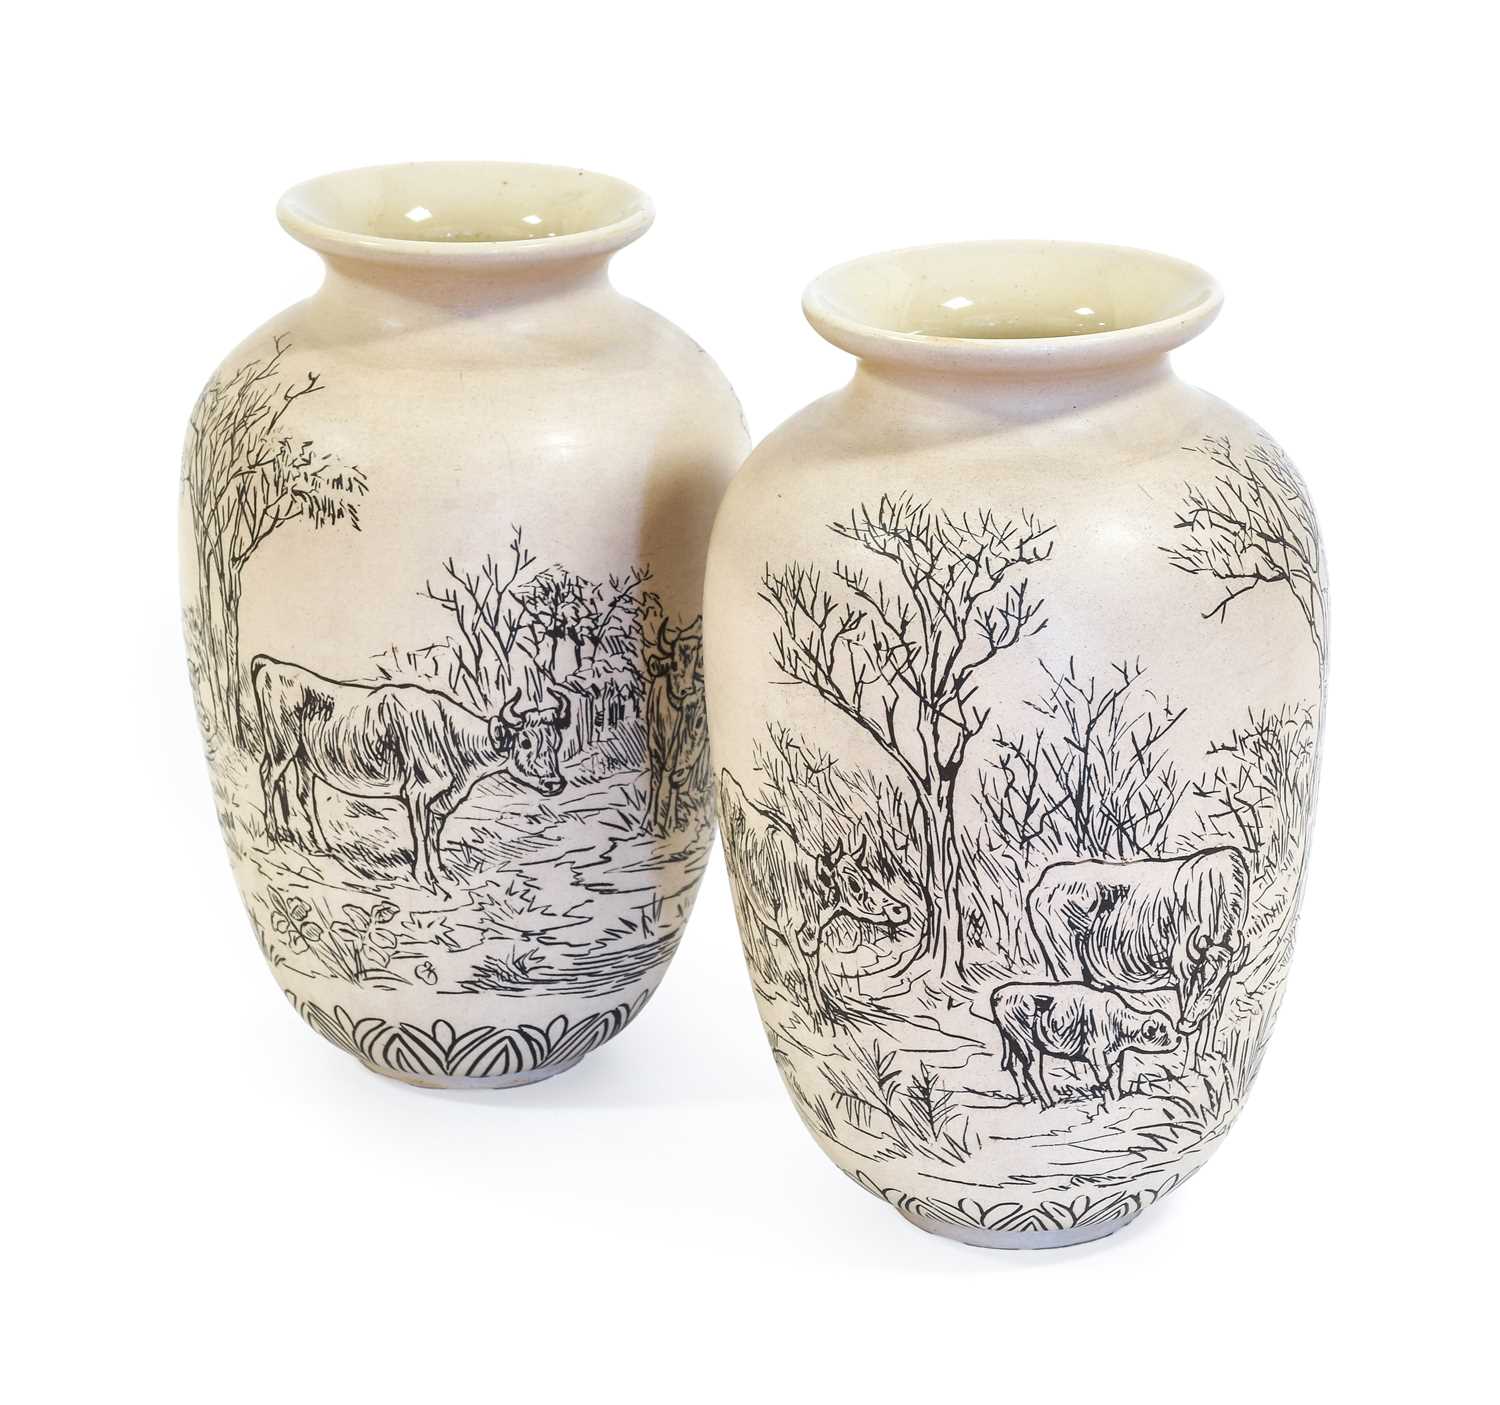 Hannah Bolton Barlow (1851-1916): A Pair of Doulton Lambeth Stoneware Vases, painted with cattle, in